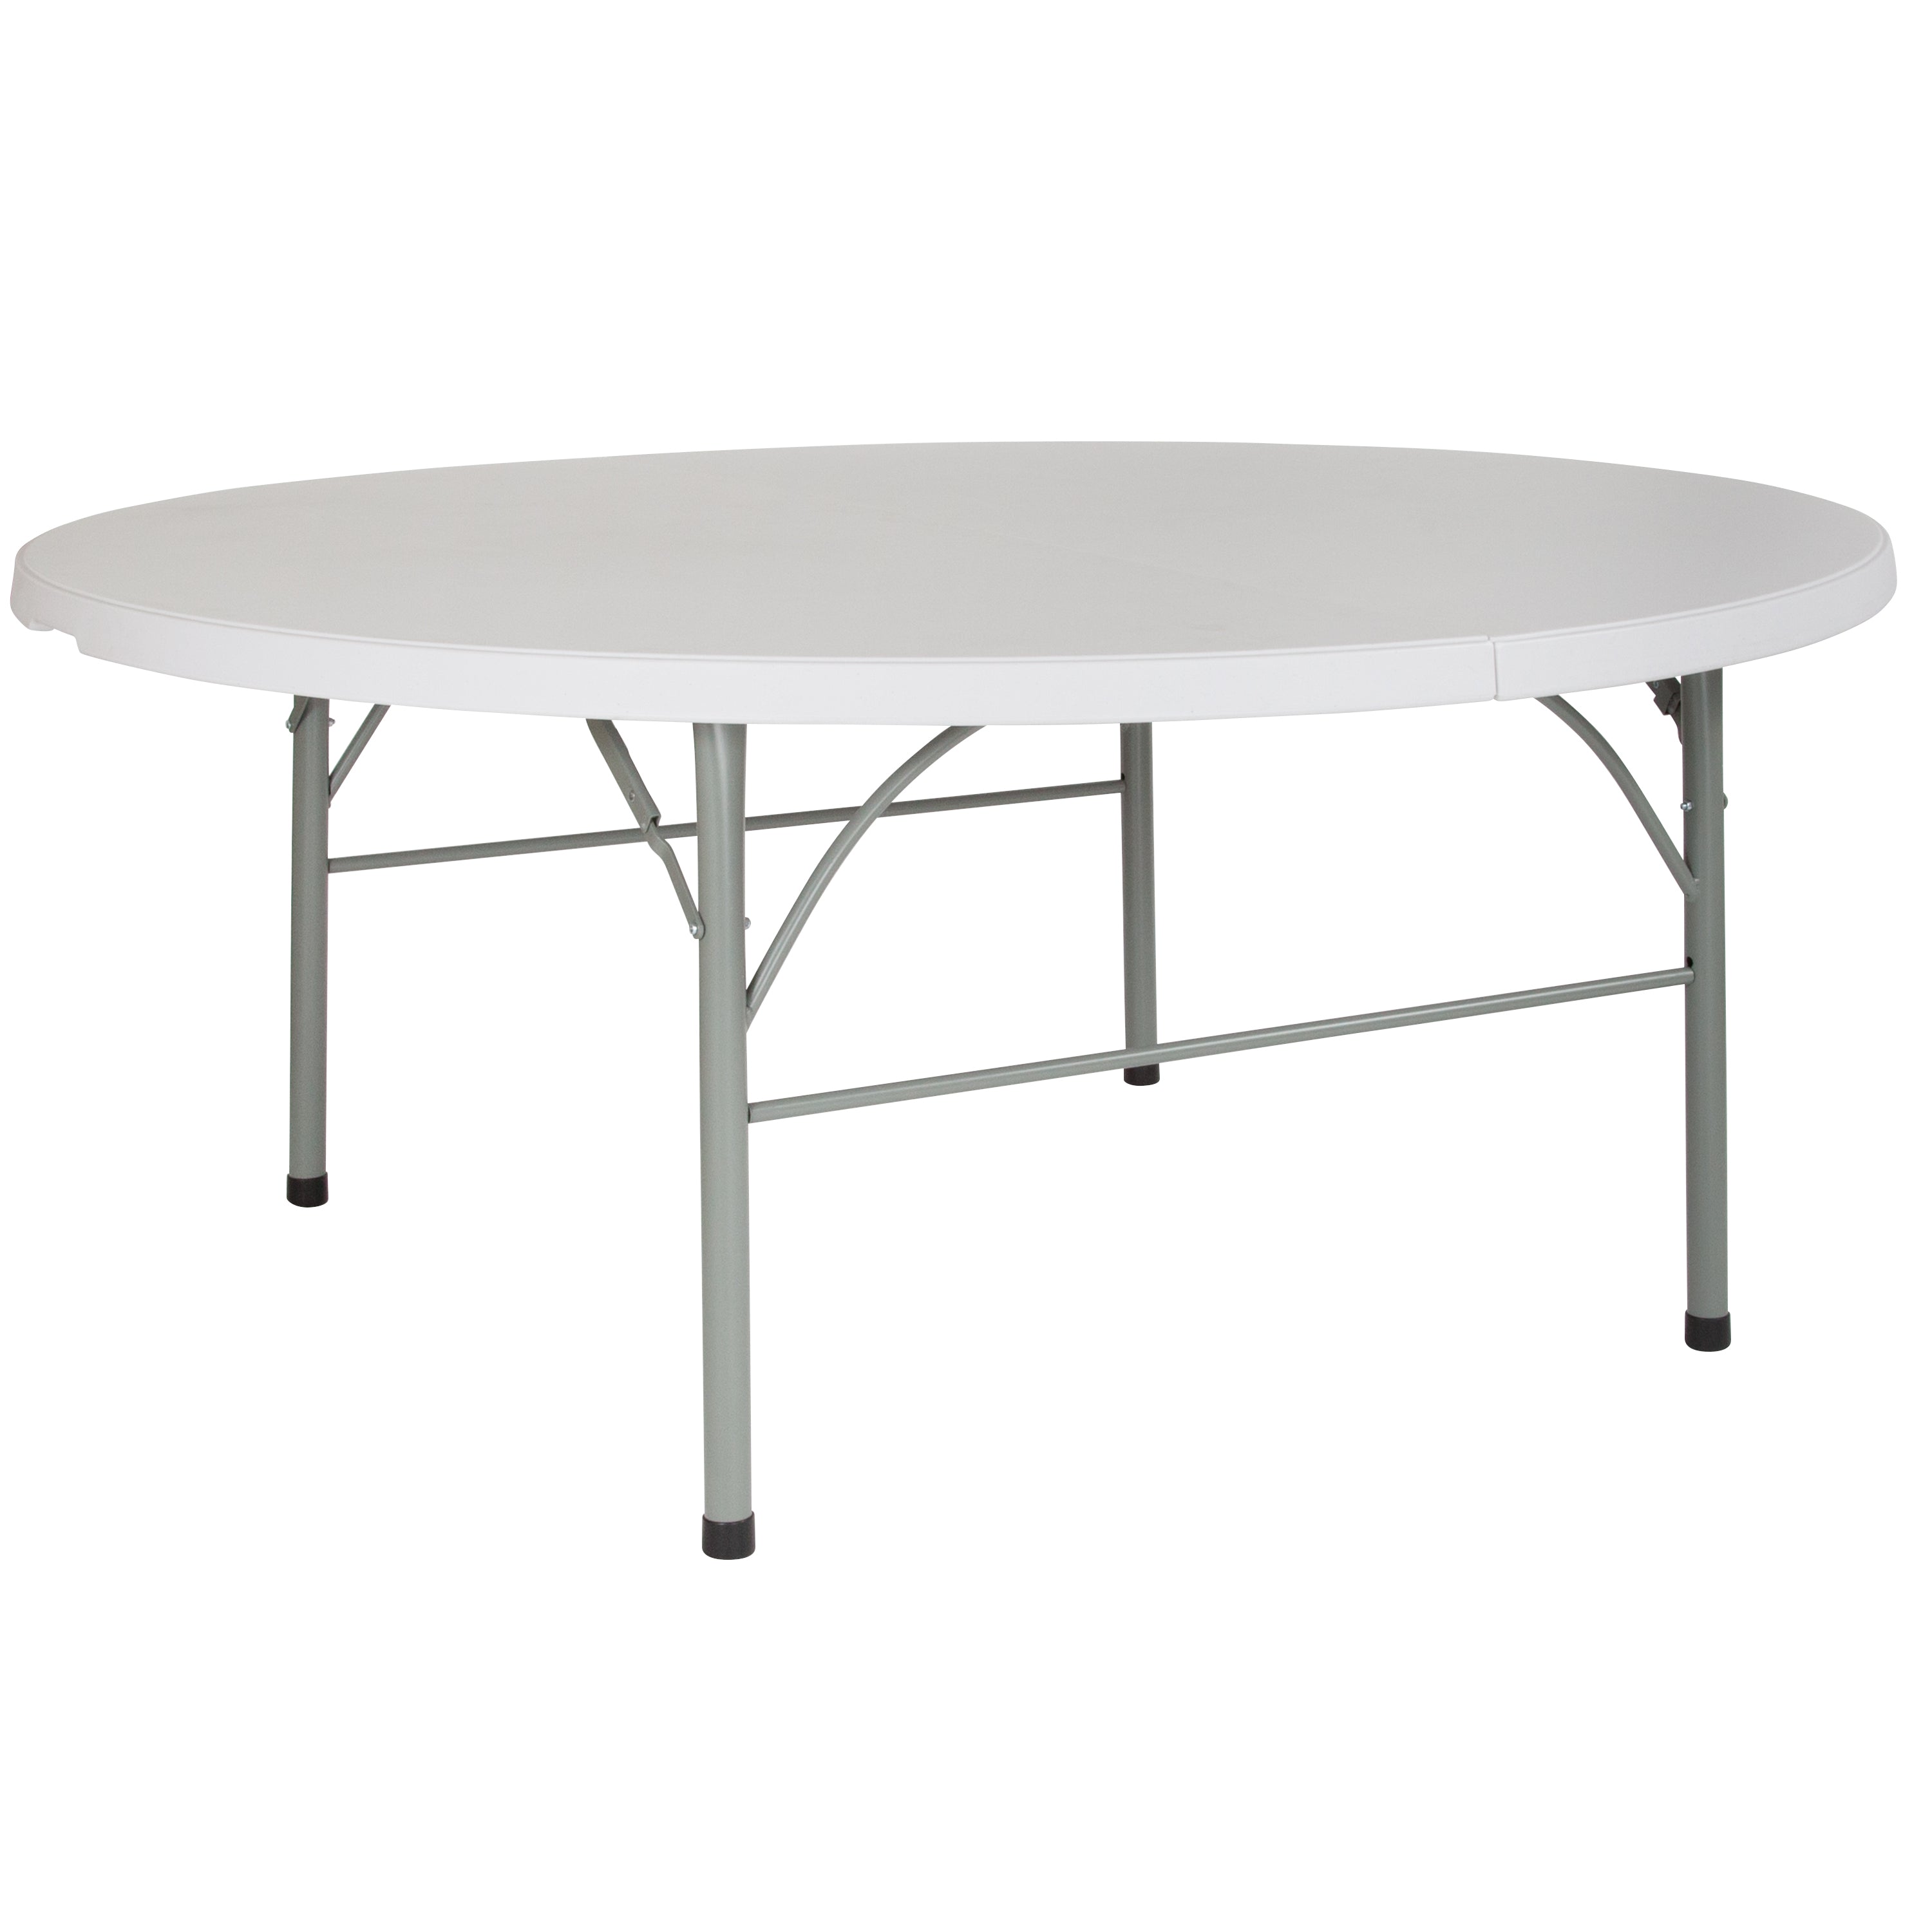 6-Foot Round Bi-Fold Plastic Banquet and Event Folding Table with Carrying Handle-Round Plastic Folding Table-Flash Furniture-Wall2Wall Furnishings